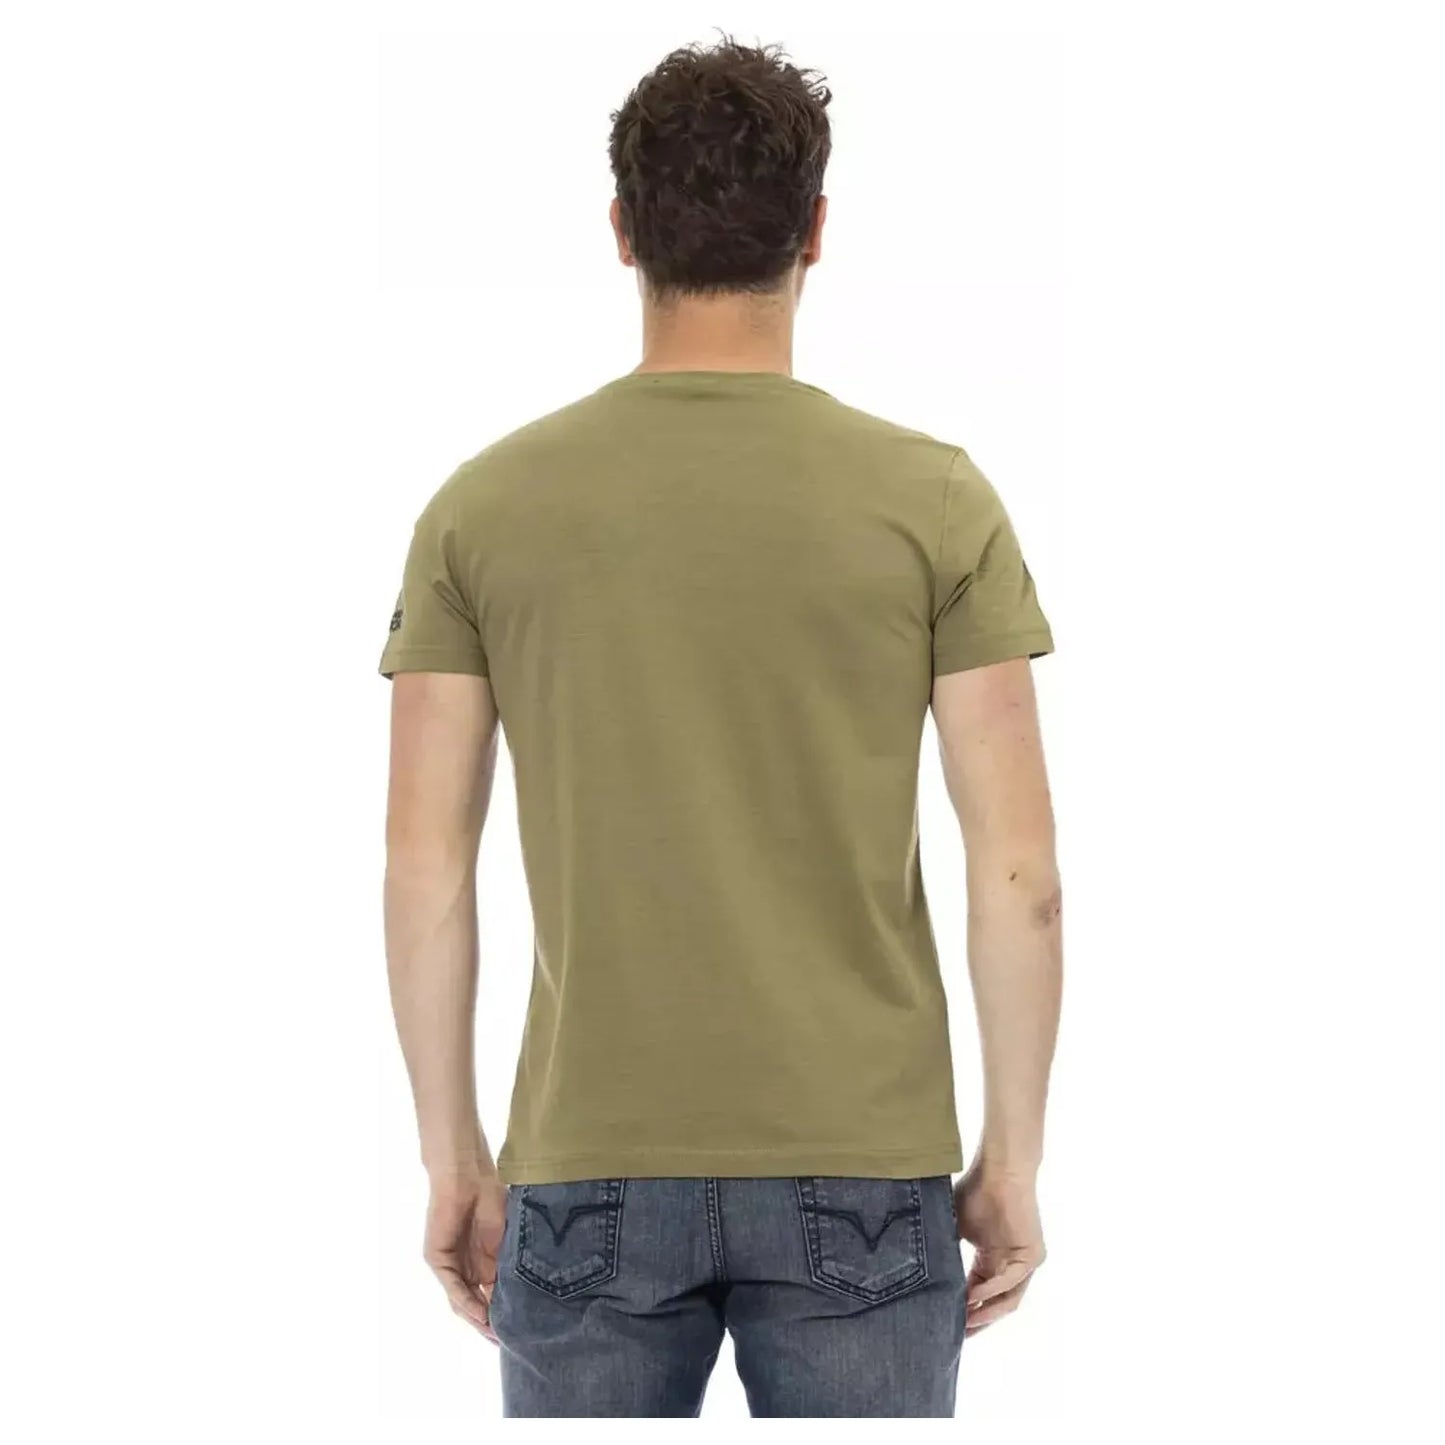 Trussardi Action Slim-Fit Green Tee with Front Print green-cotton-t-shirt-54